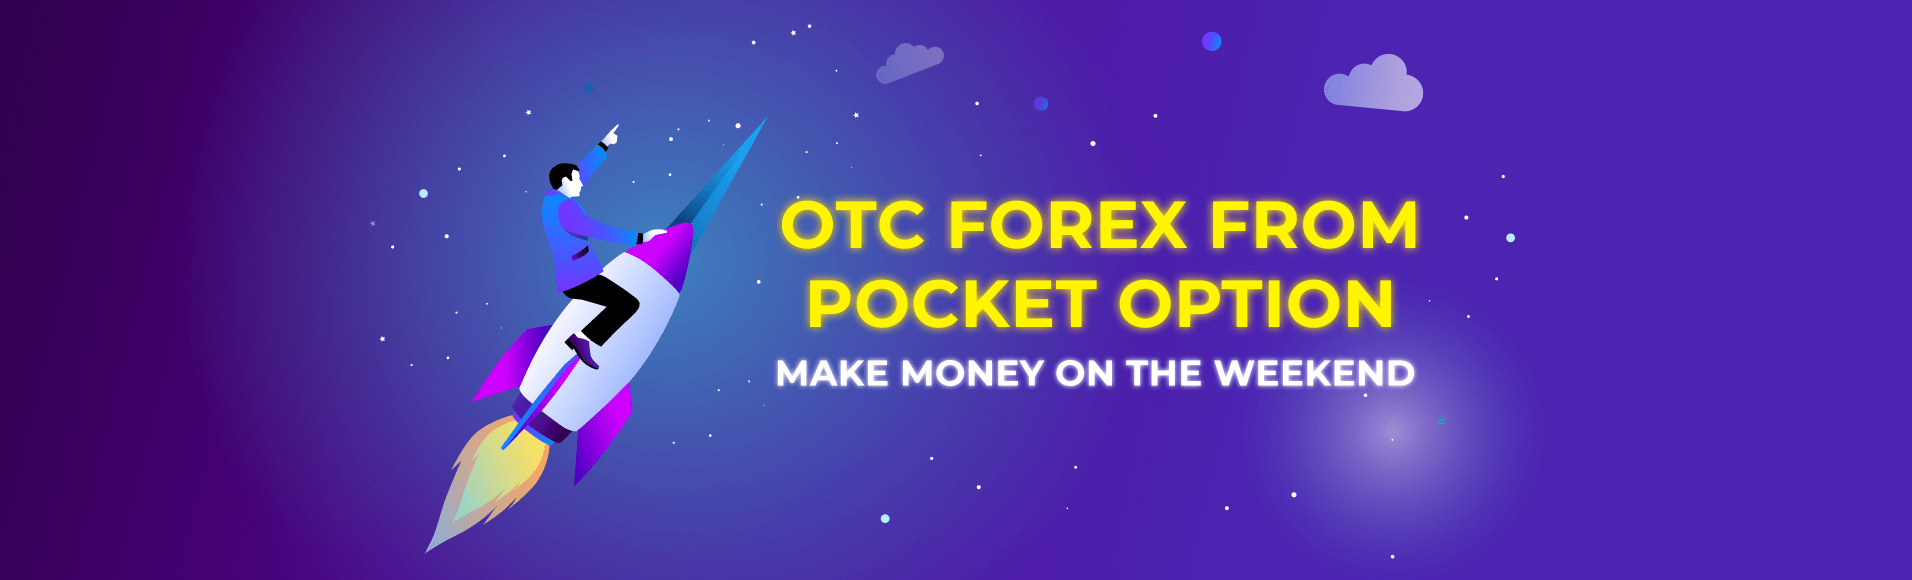 OTC Forex from Pocket Option - make money on the weekend